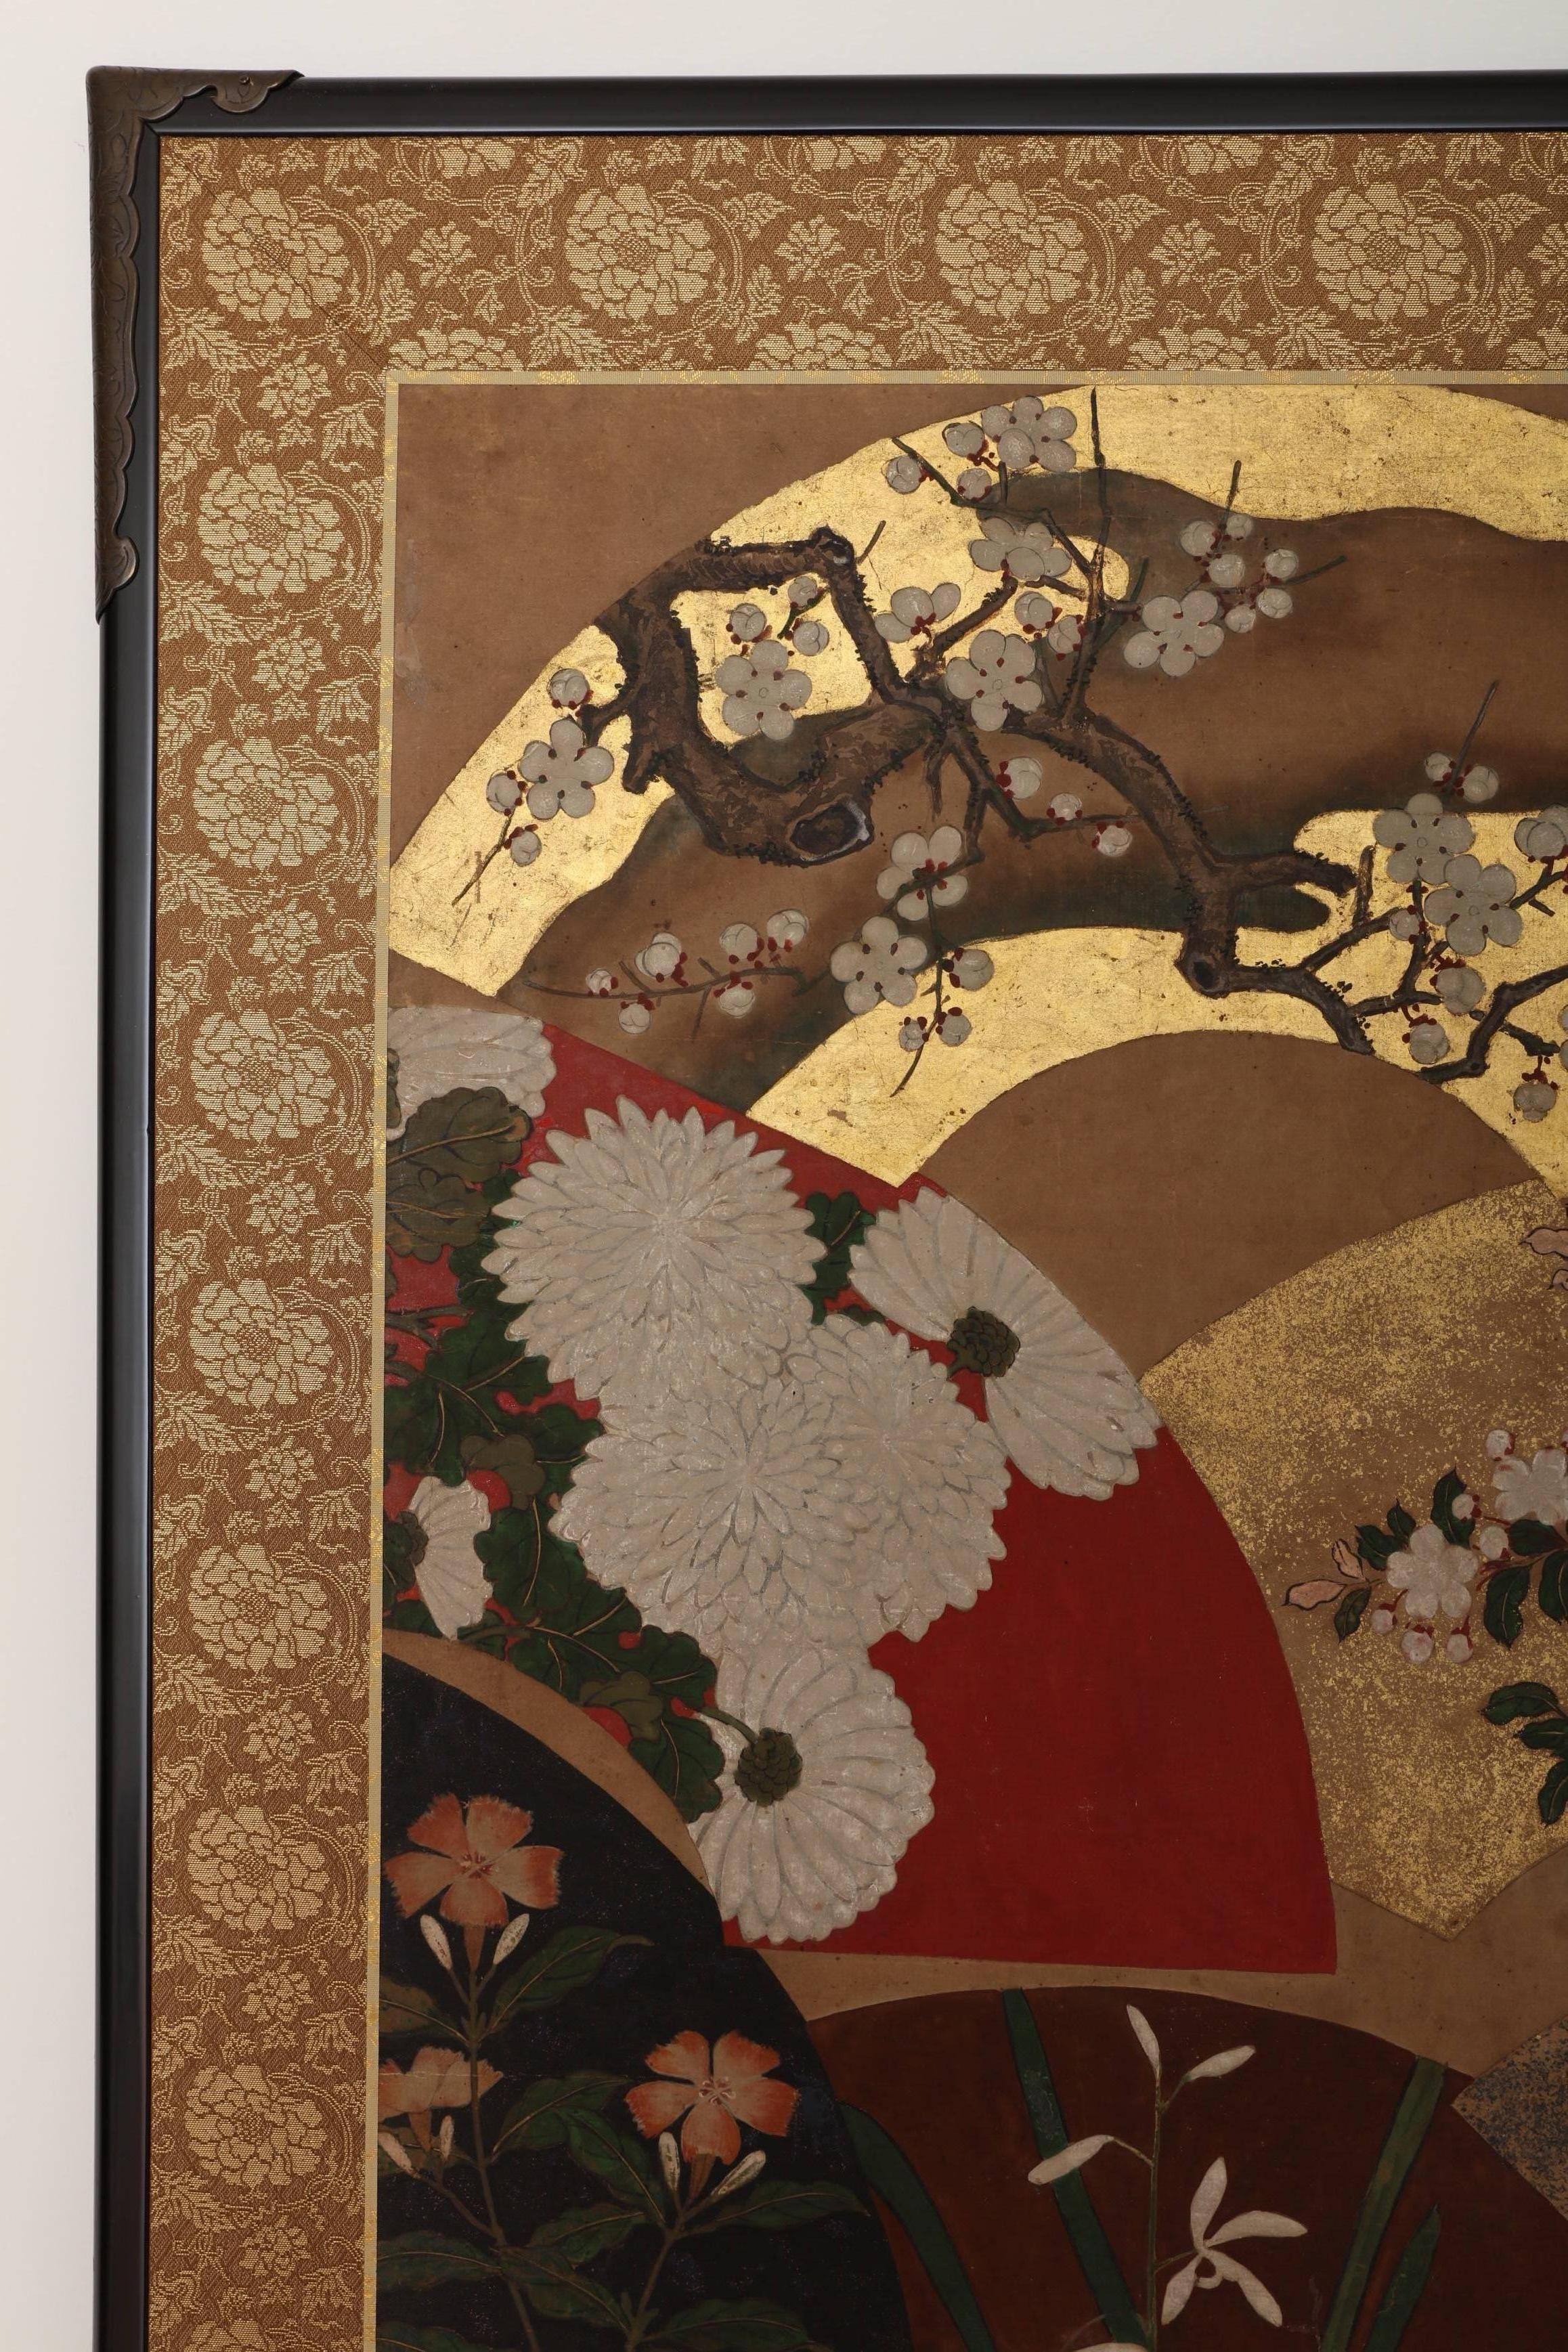 Two-panel folding screen; ink, mineral colors, go fun, gold leaf and gold sprinkle on paper.
Design of scattered fans, decorated with flowers associated to the different seasons.